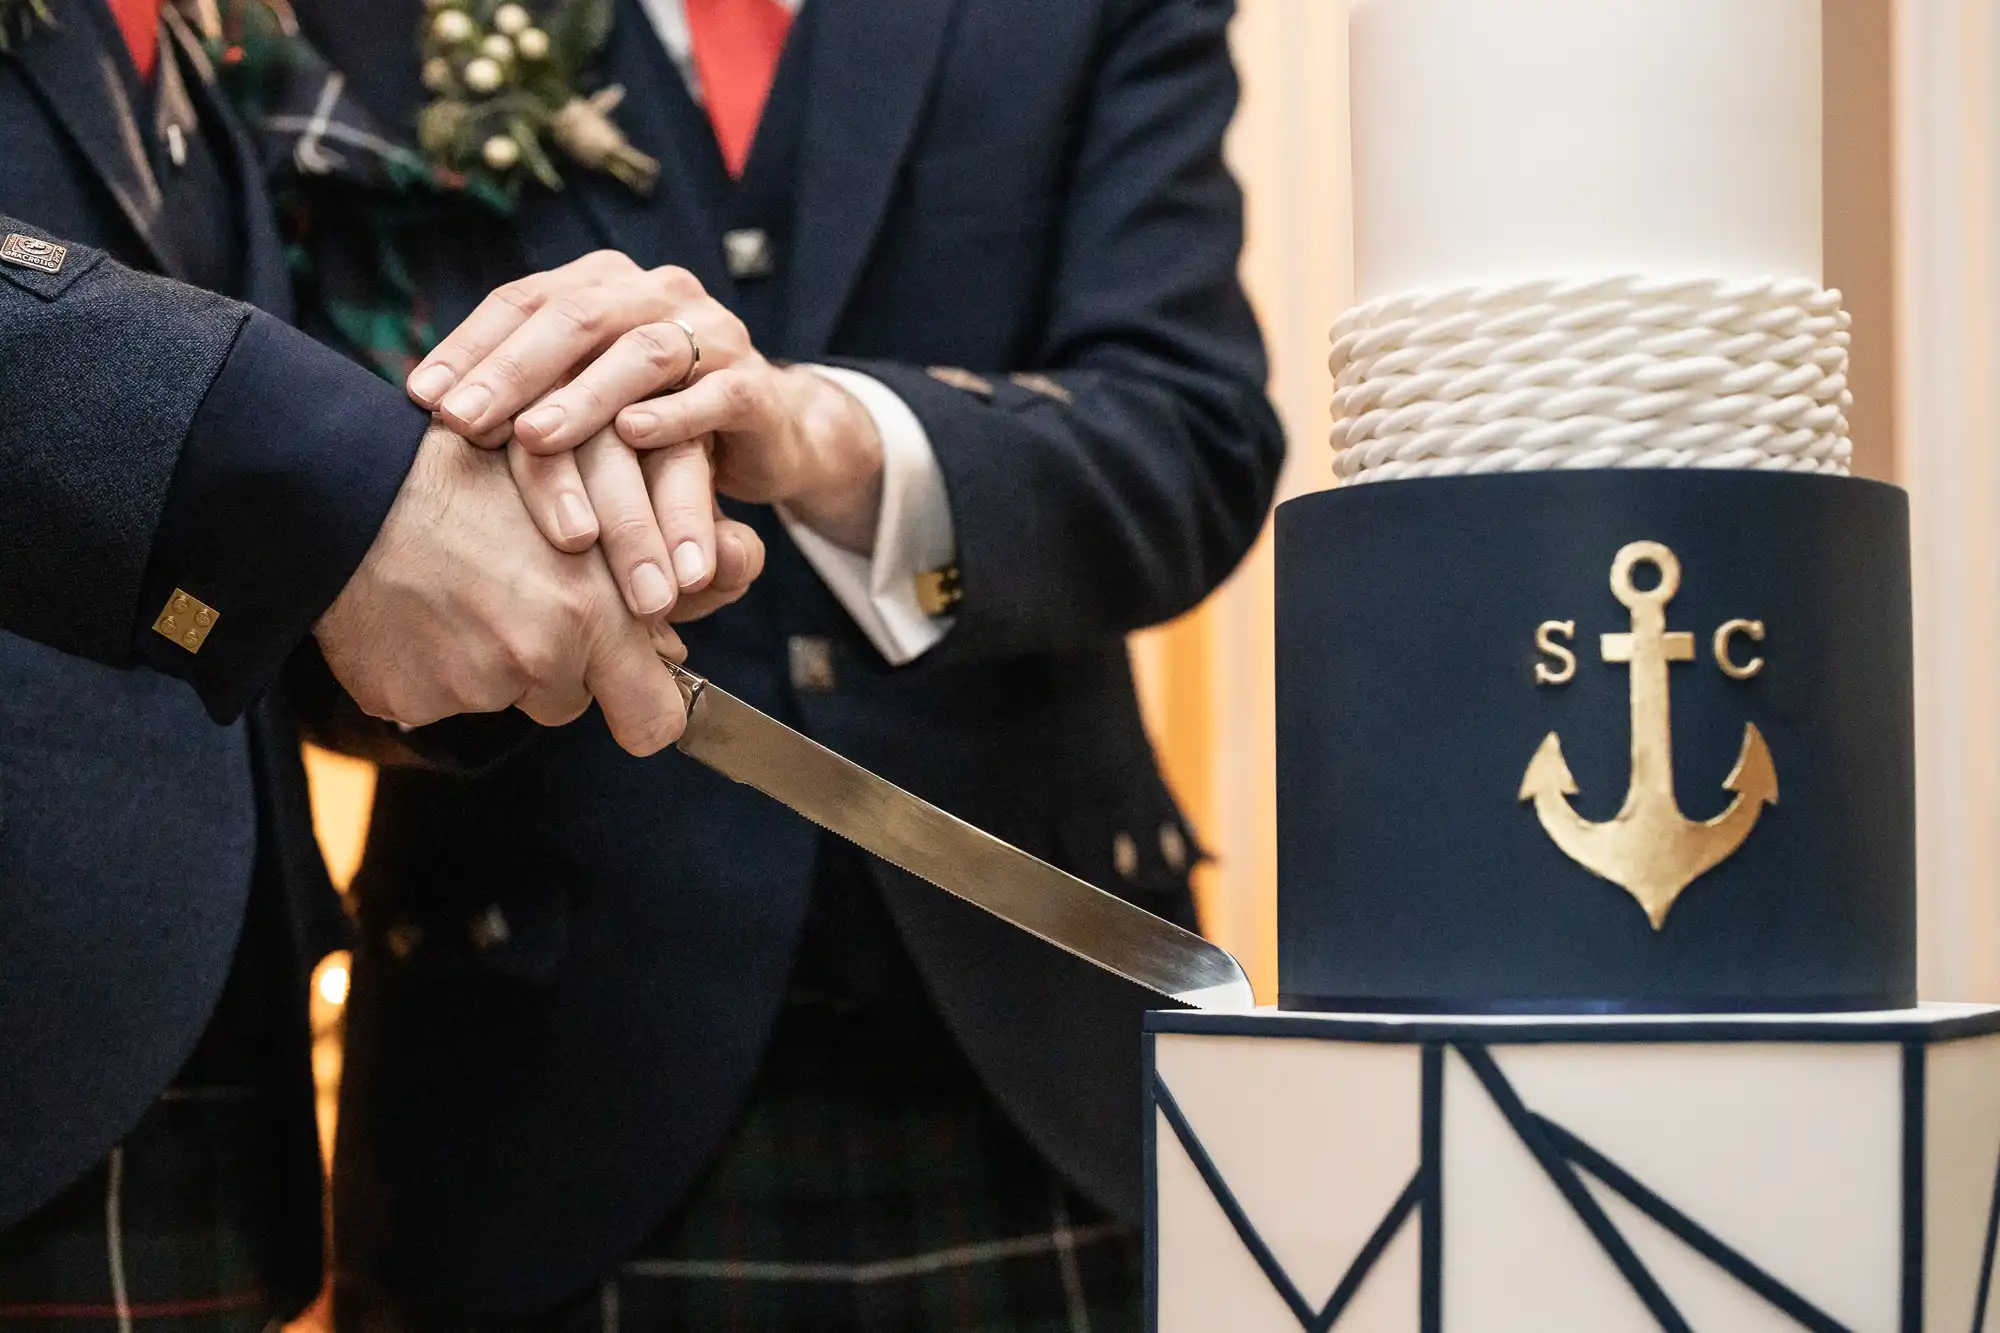 Two people in formal attire hold a knife to cut a multi-tiered navy blue and white cake adorned with an anchor and rope design with the initials "S" and "C".